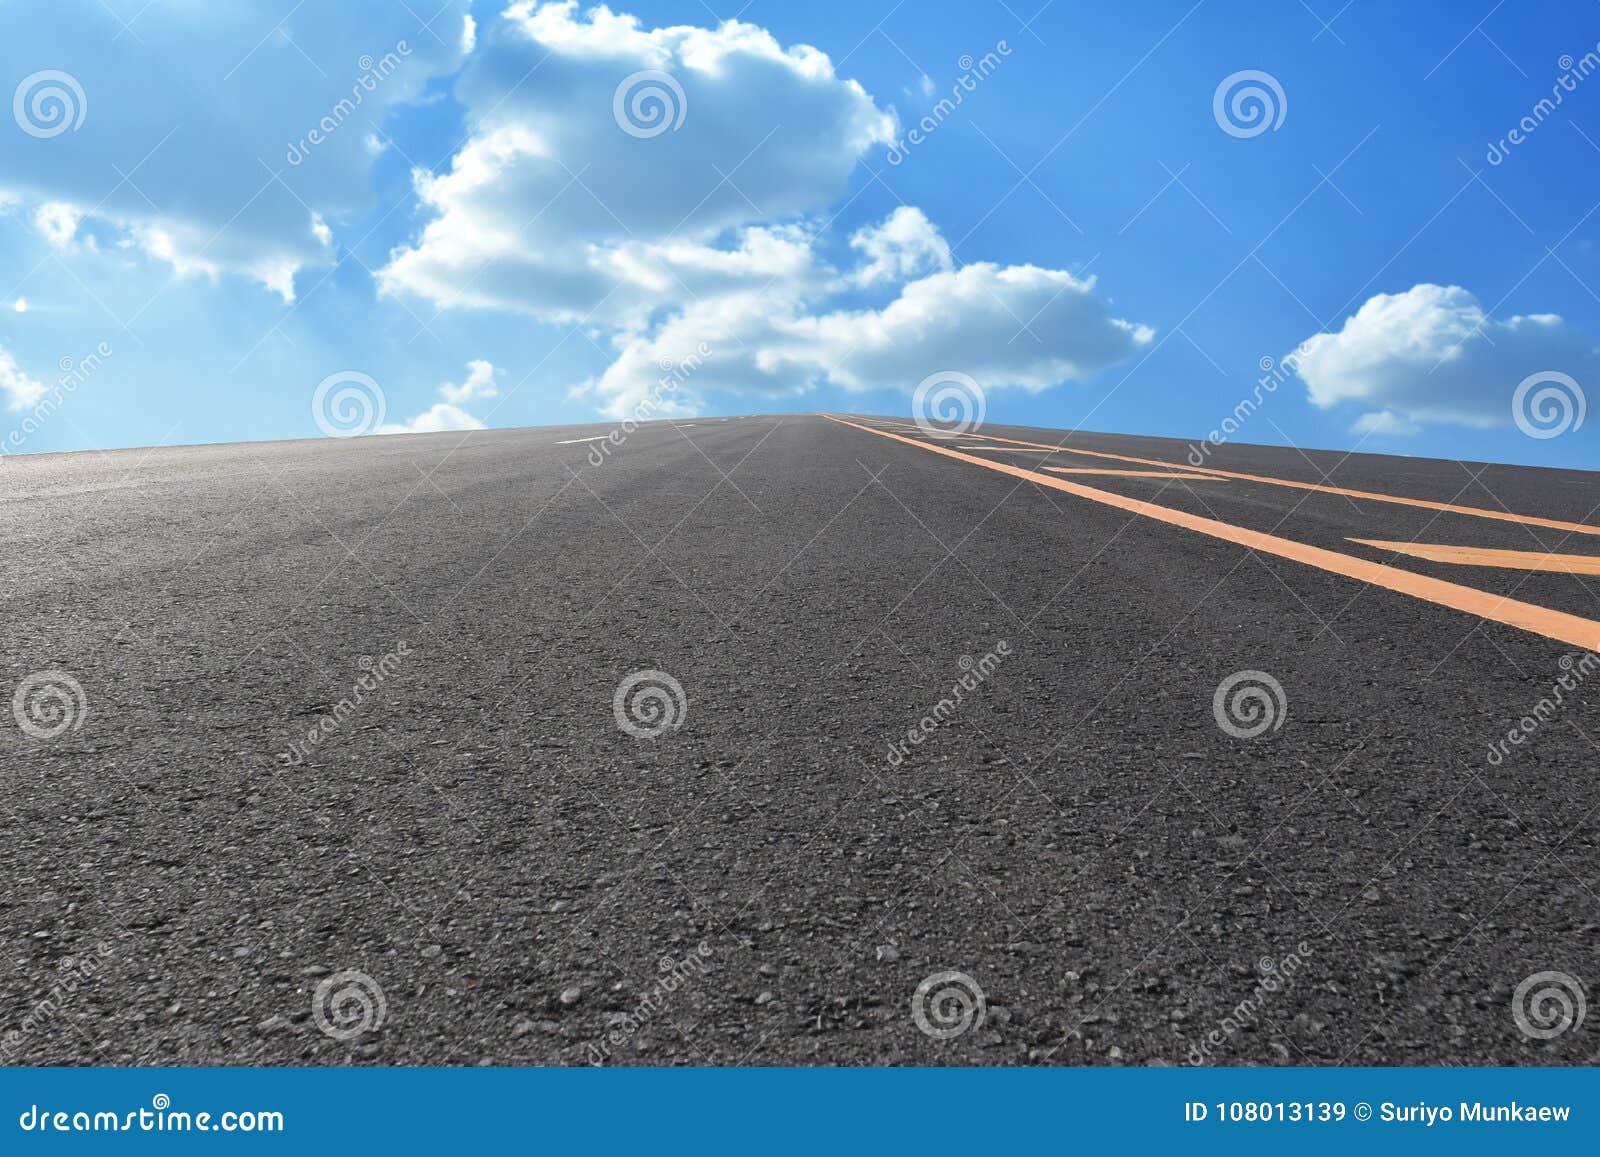 Road Floor and Sky Background Stock Image - Image of journey, country:  108013139